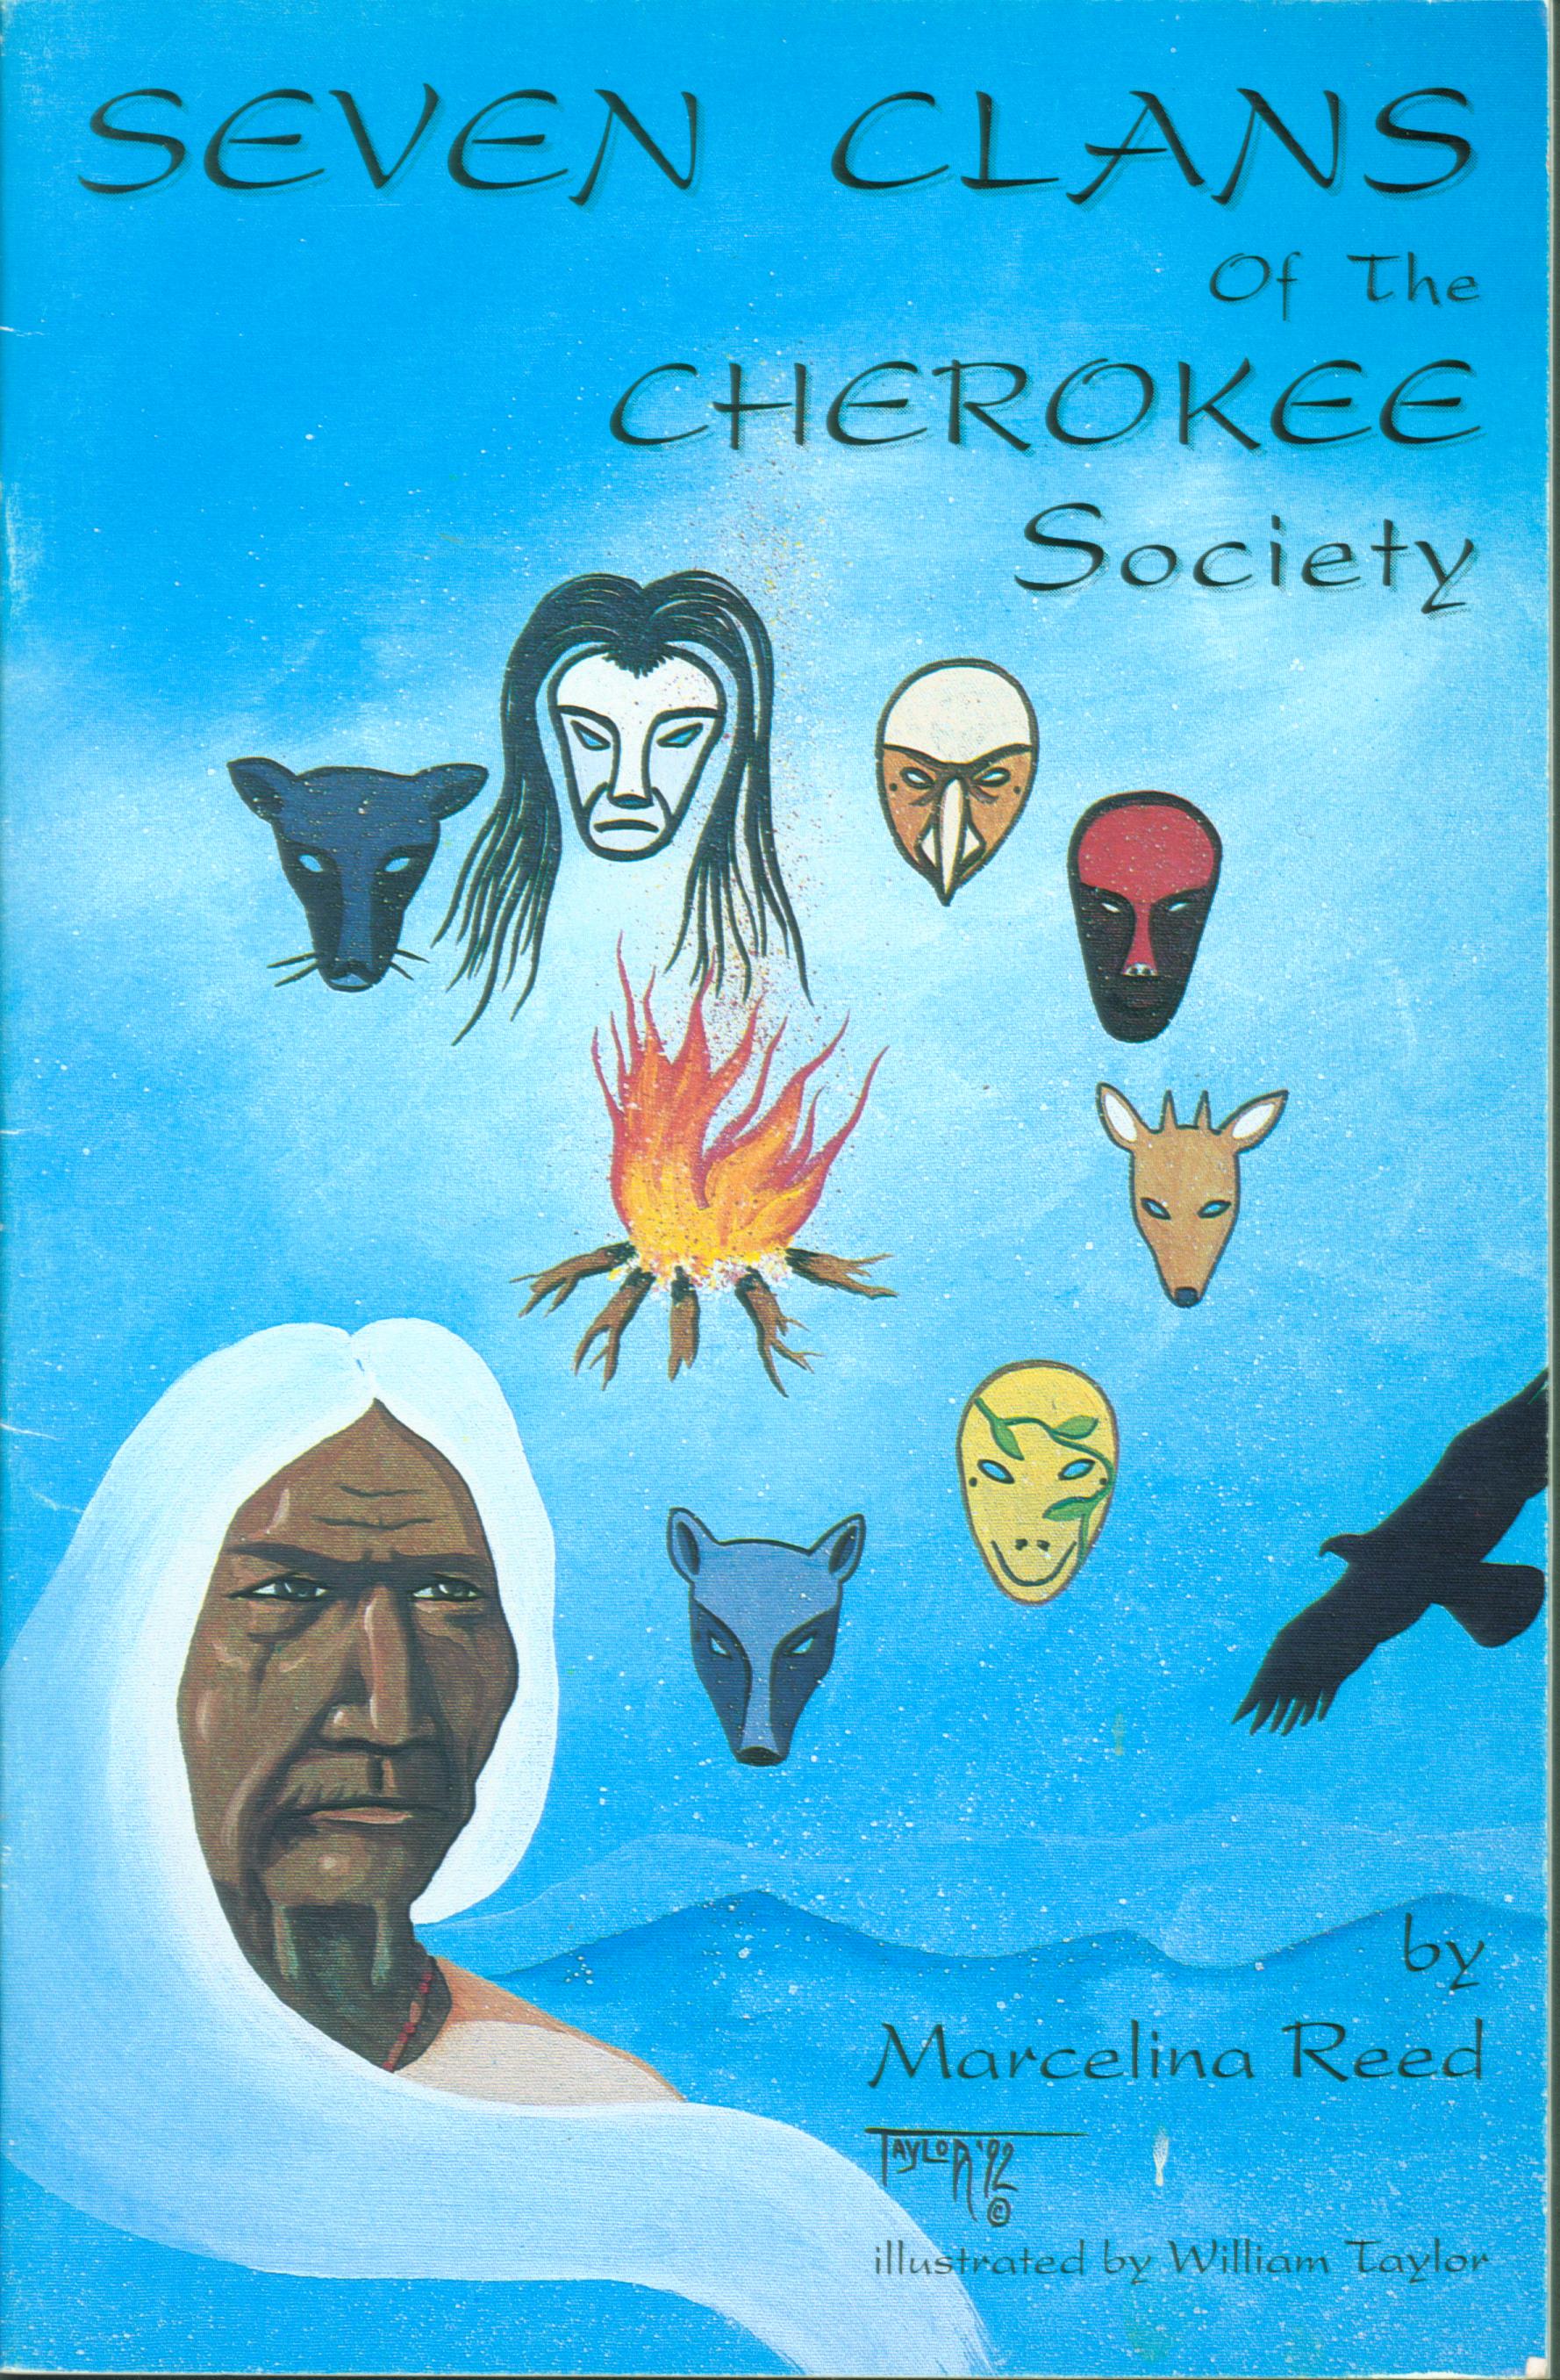 SEVEN CLANS OF THE CHEROKEE SOCIETY.